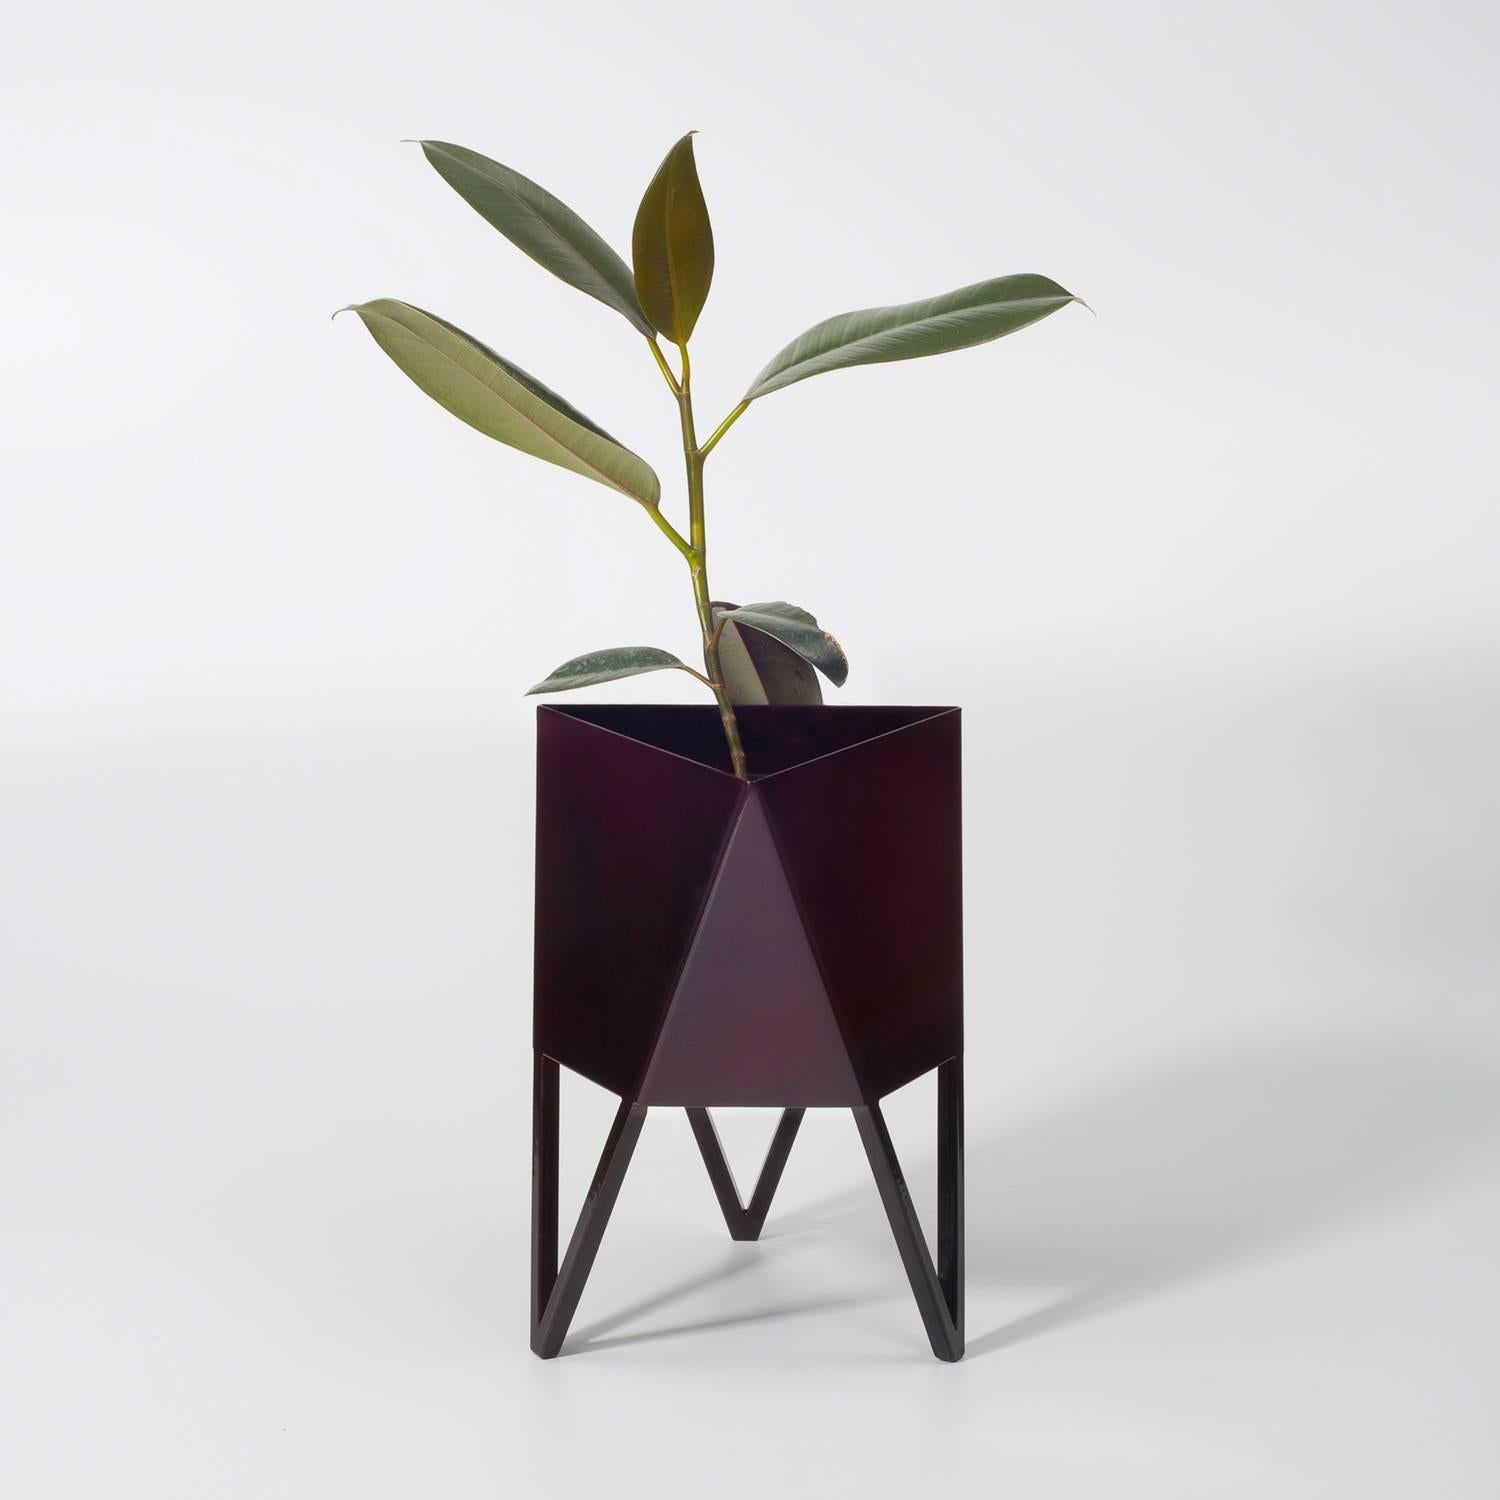 Introducing Force/Collide's award-winning signature planter, an ongoing production with multiple colors and sizes. A unique geometric pattern that's triangular at the top and hexagonal at the base is central to the design, both aesthetically and